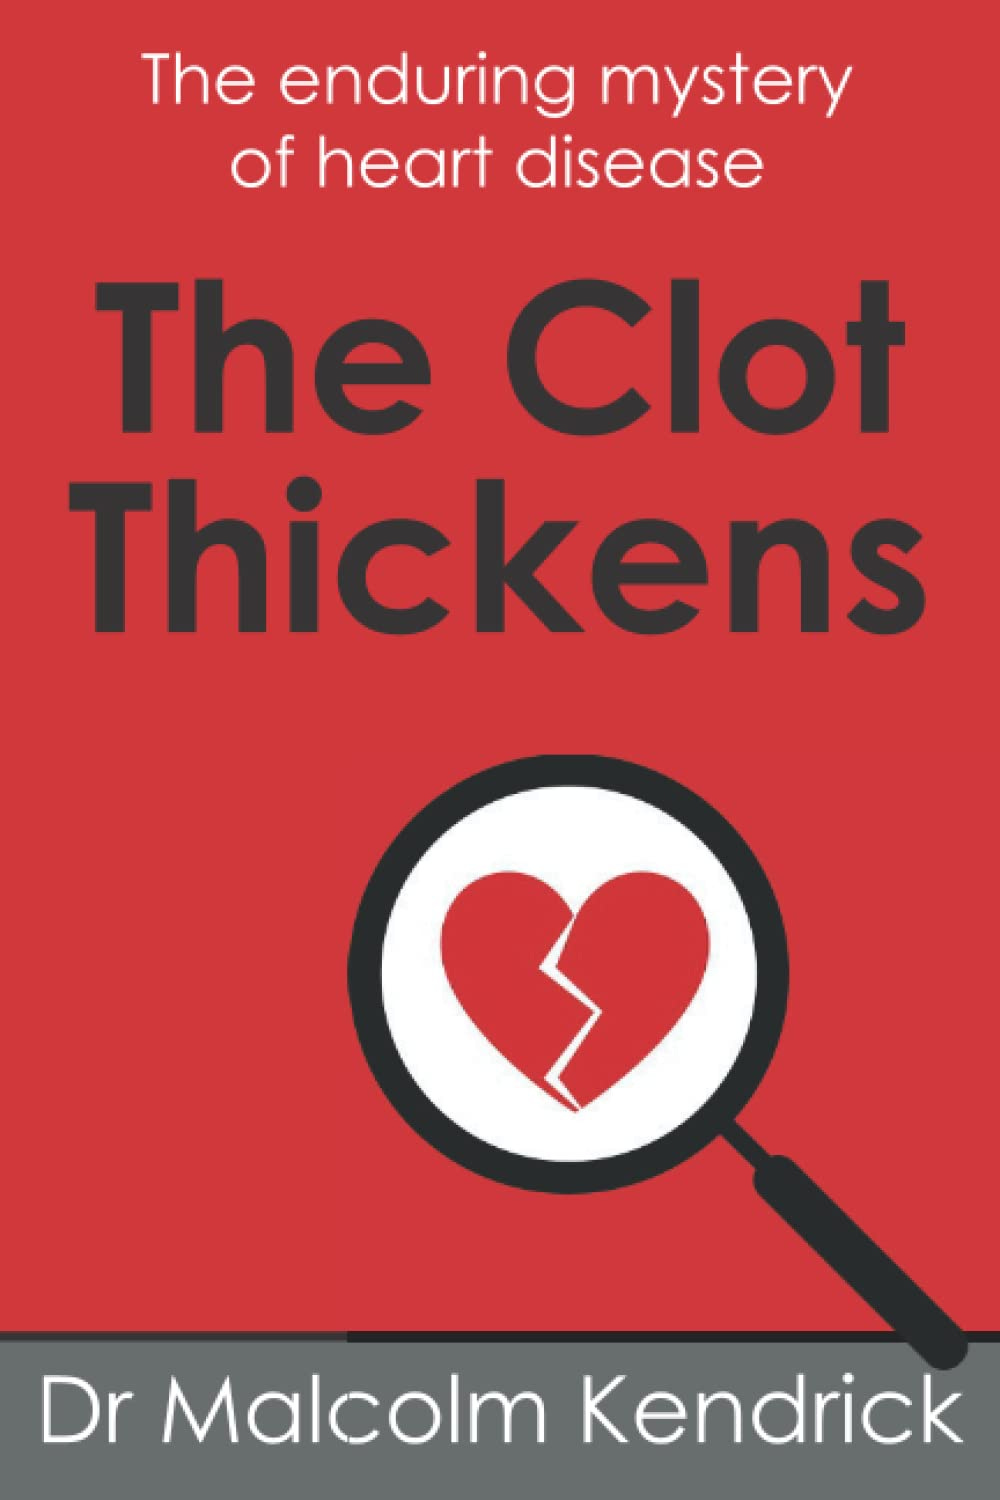 The Clot Thickens: The enduring mystery of heart disease: Kendrick, Dr  Malcolm: 9781907797767: Amazon.com: Books